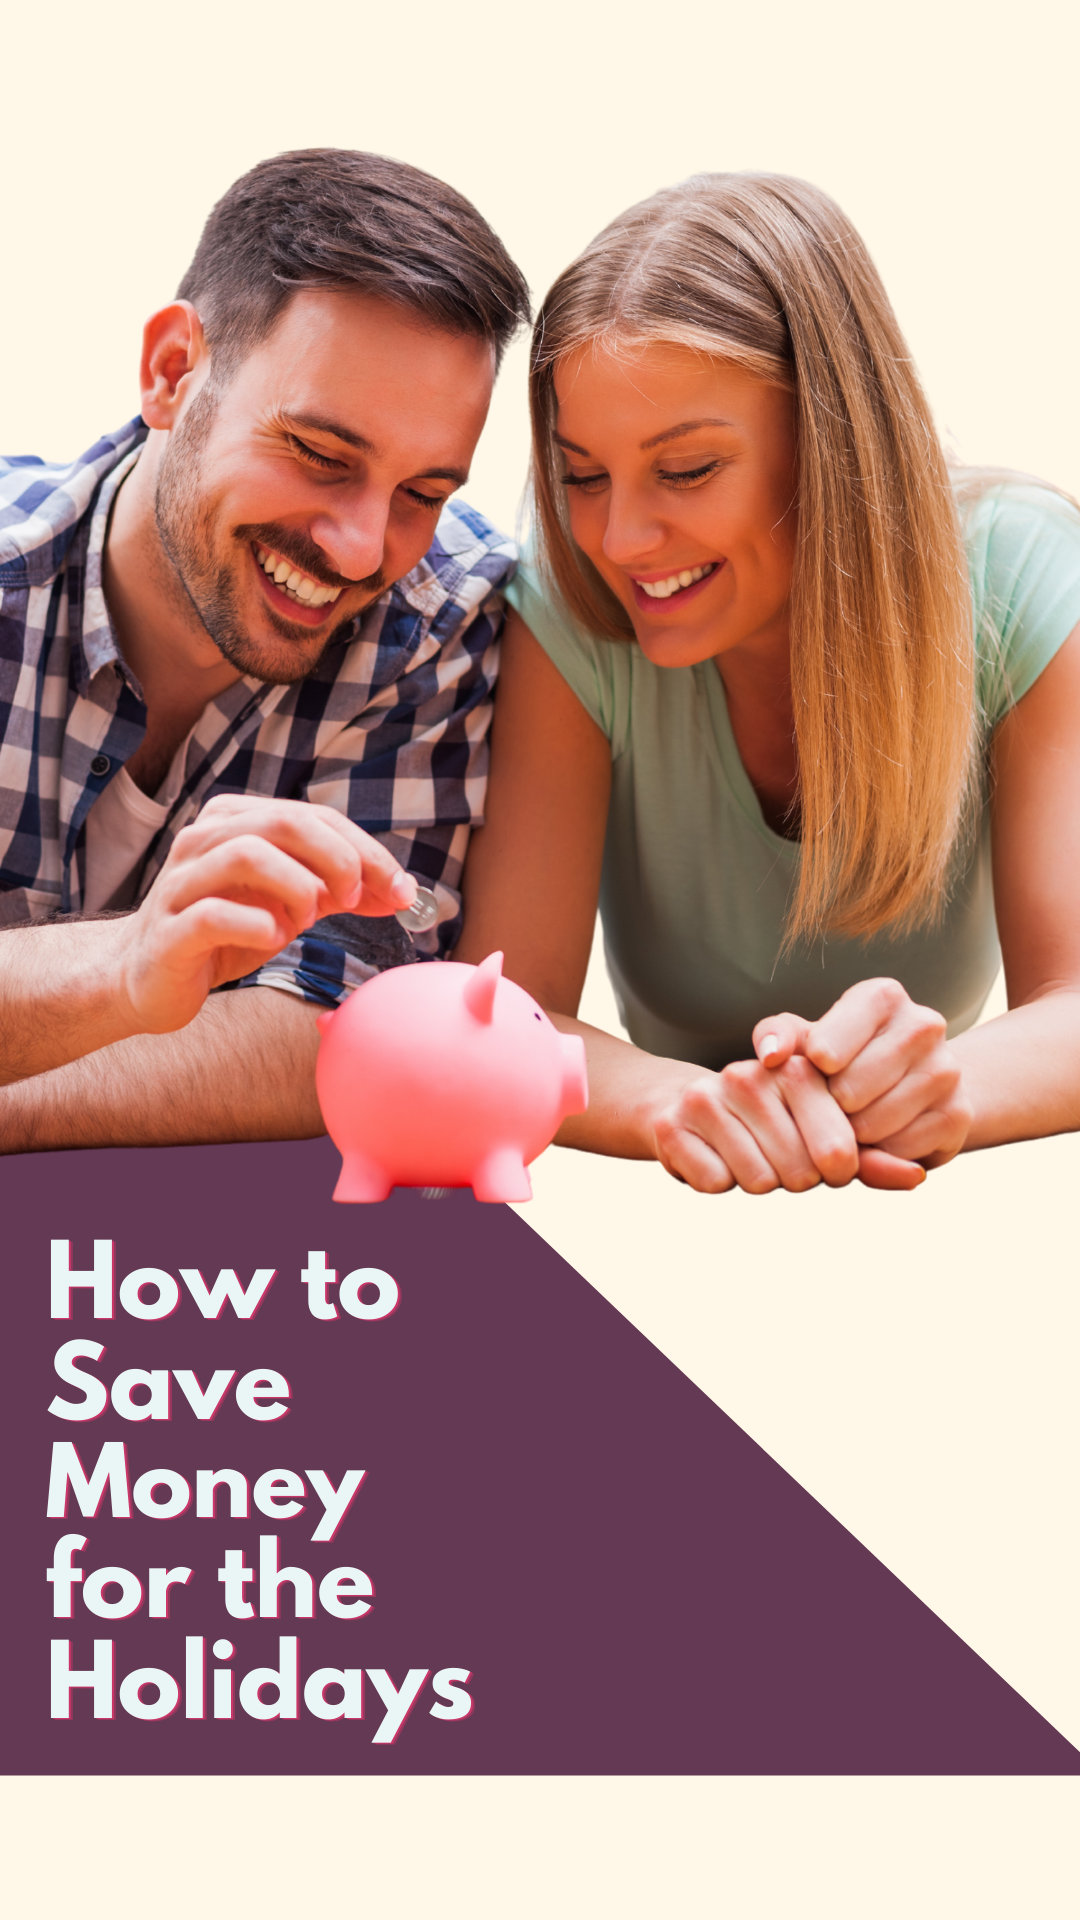 How to Save Money for the Holidays